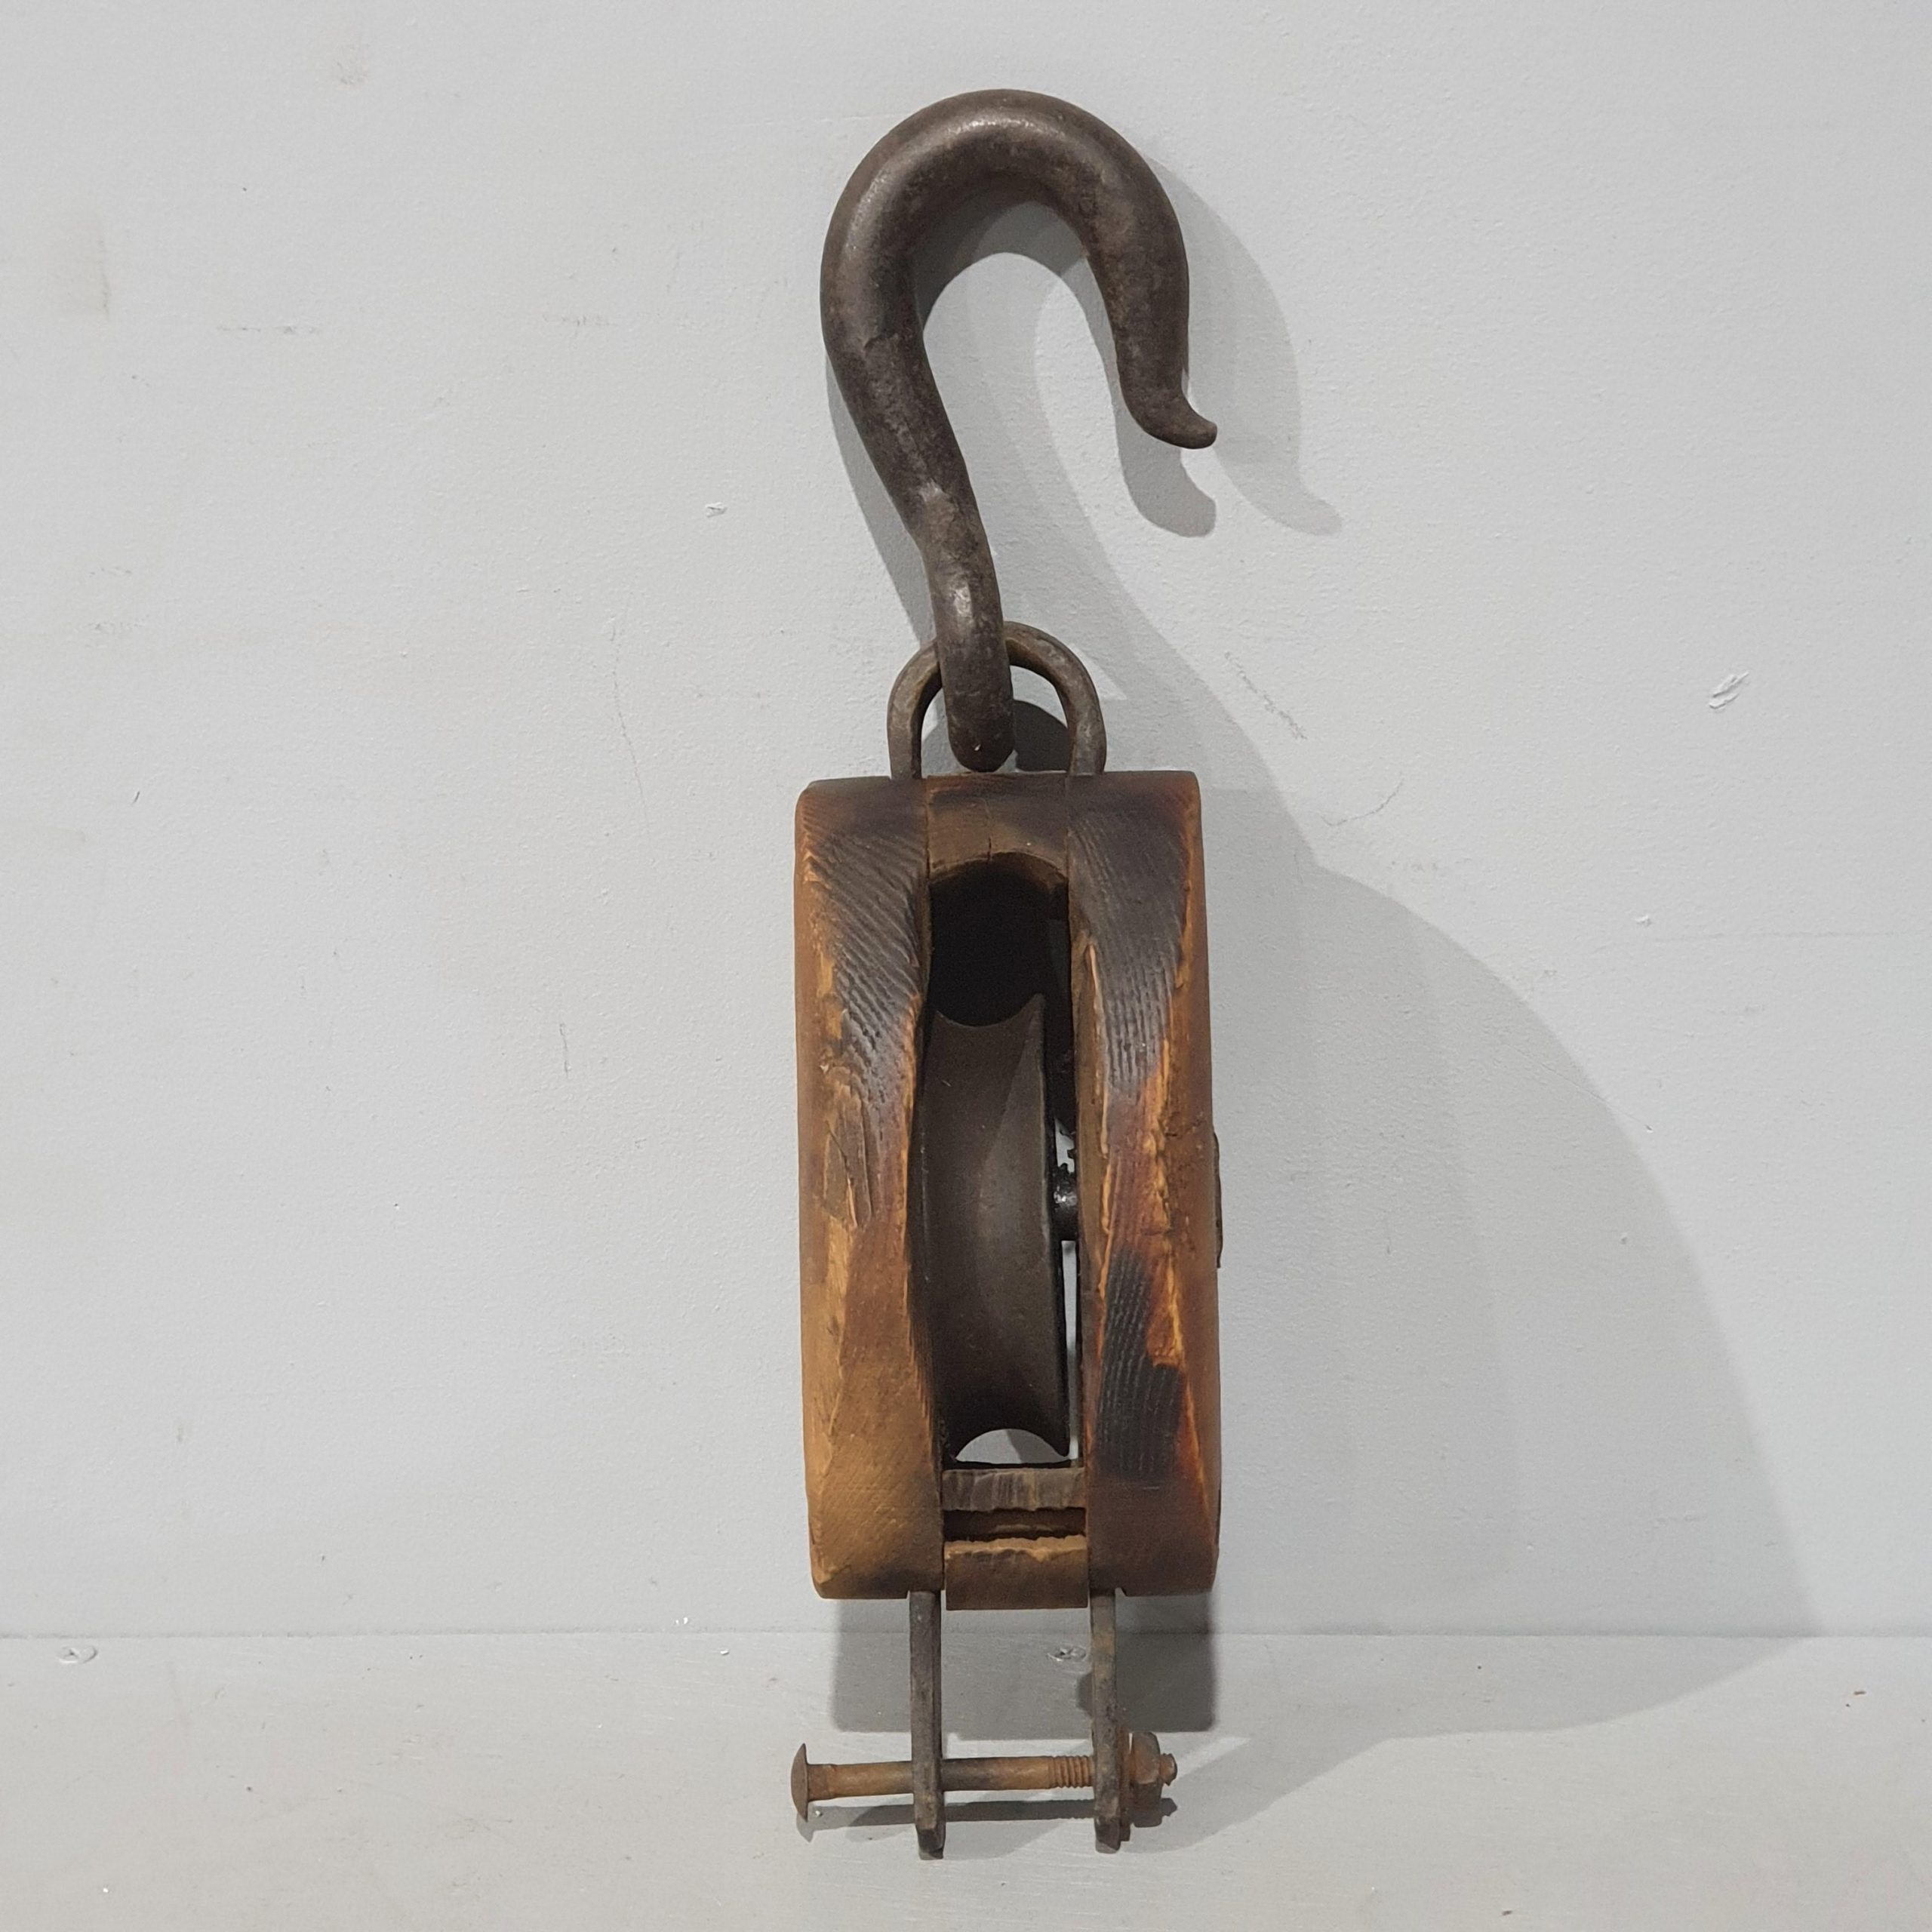 Vintage American Wooden Block and Tackle Pulley